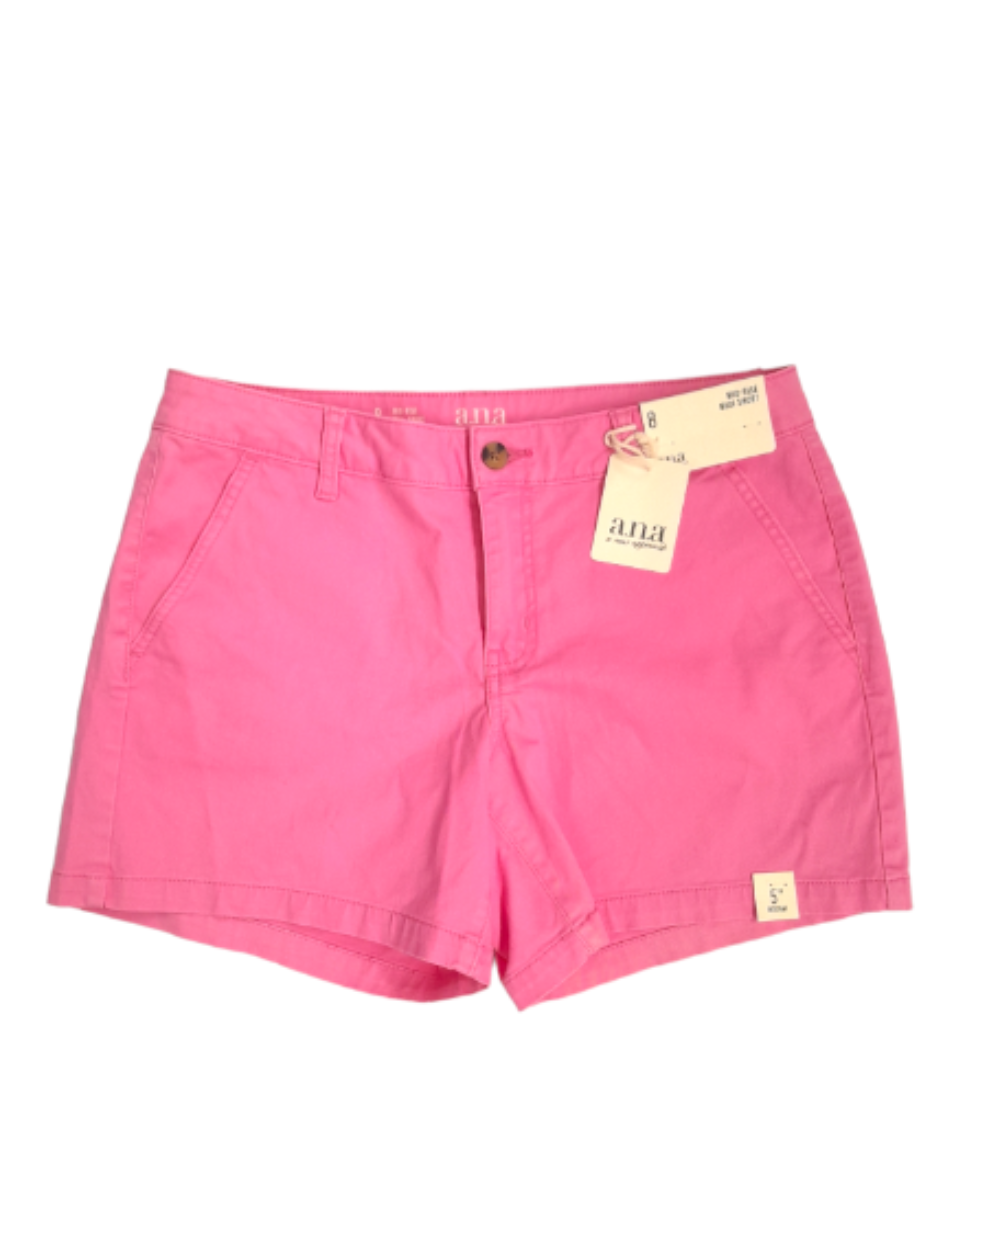 Shorts Casuales Ana a new approach